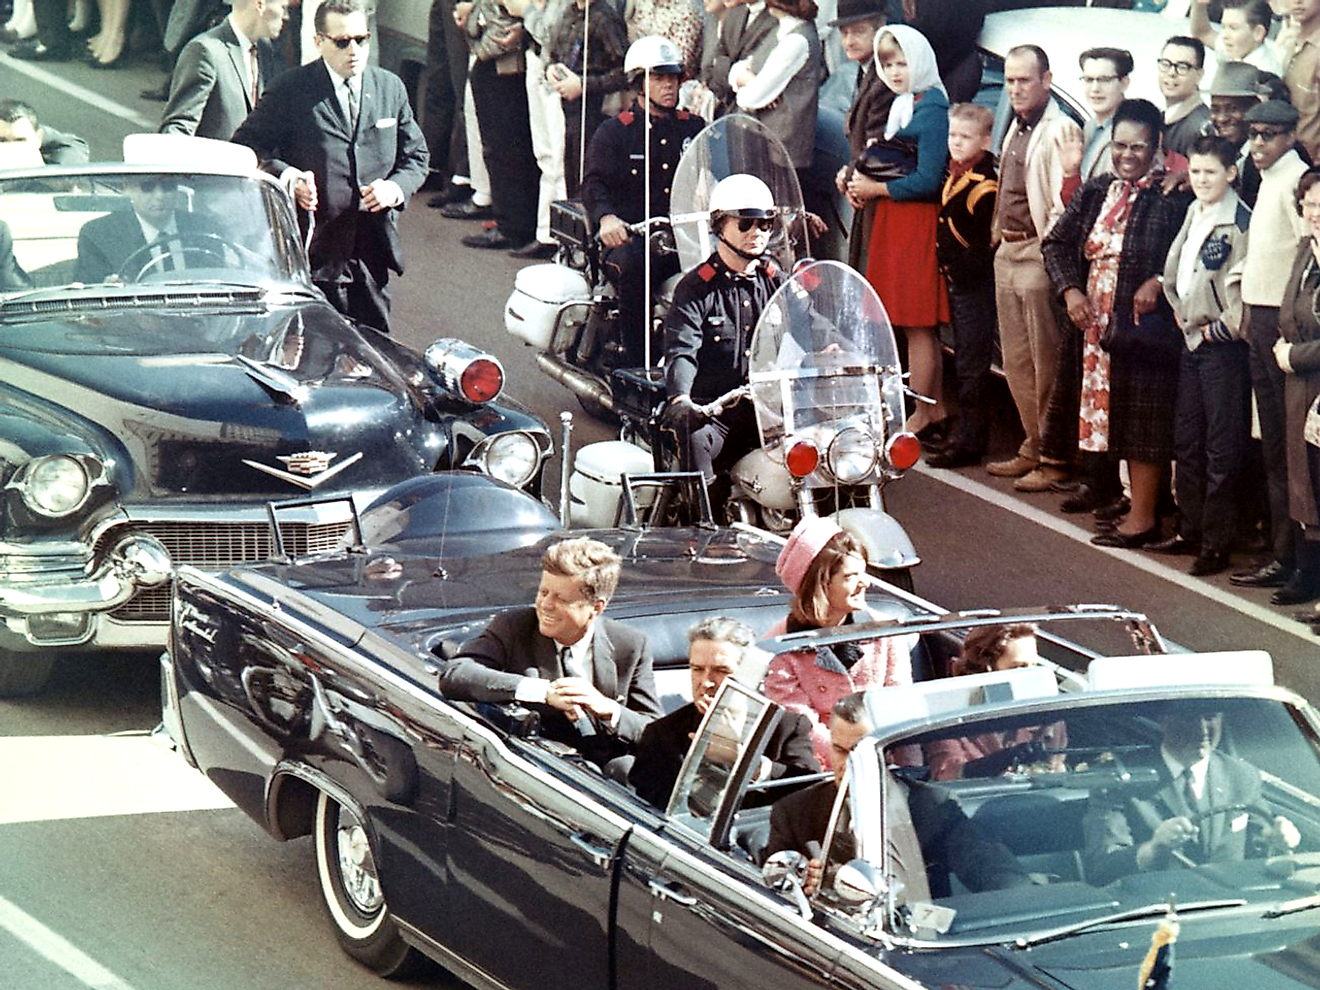 President Kennedy and motorcade minutes before his assassination in Dallas in 1963. Image credit: Walt Cisco, Dallas Morning News/Public domain